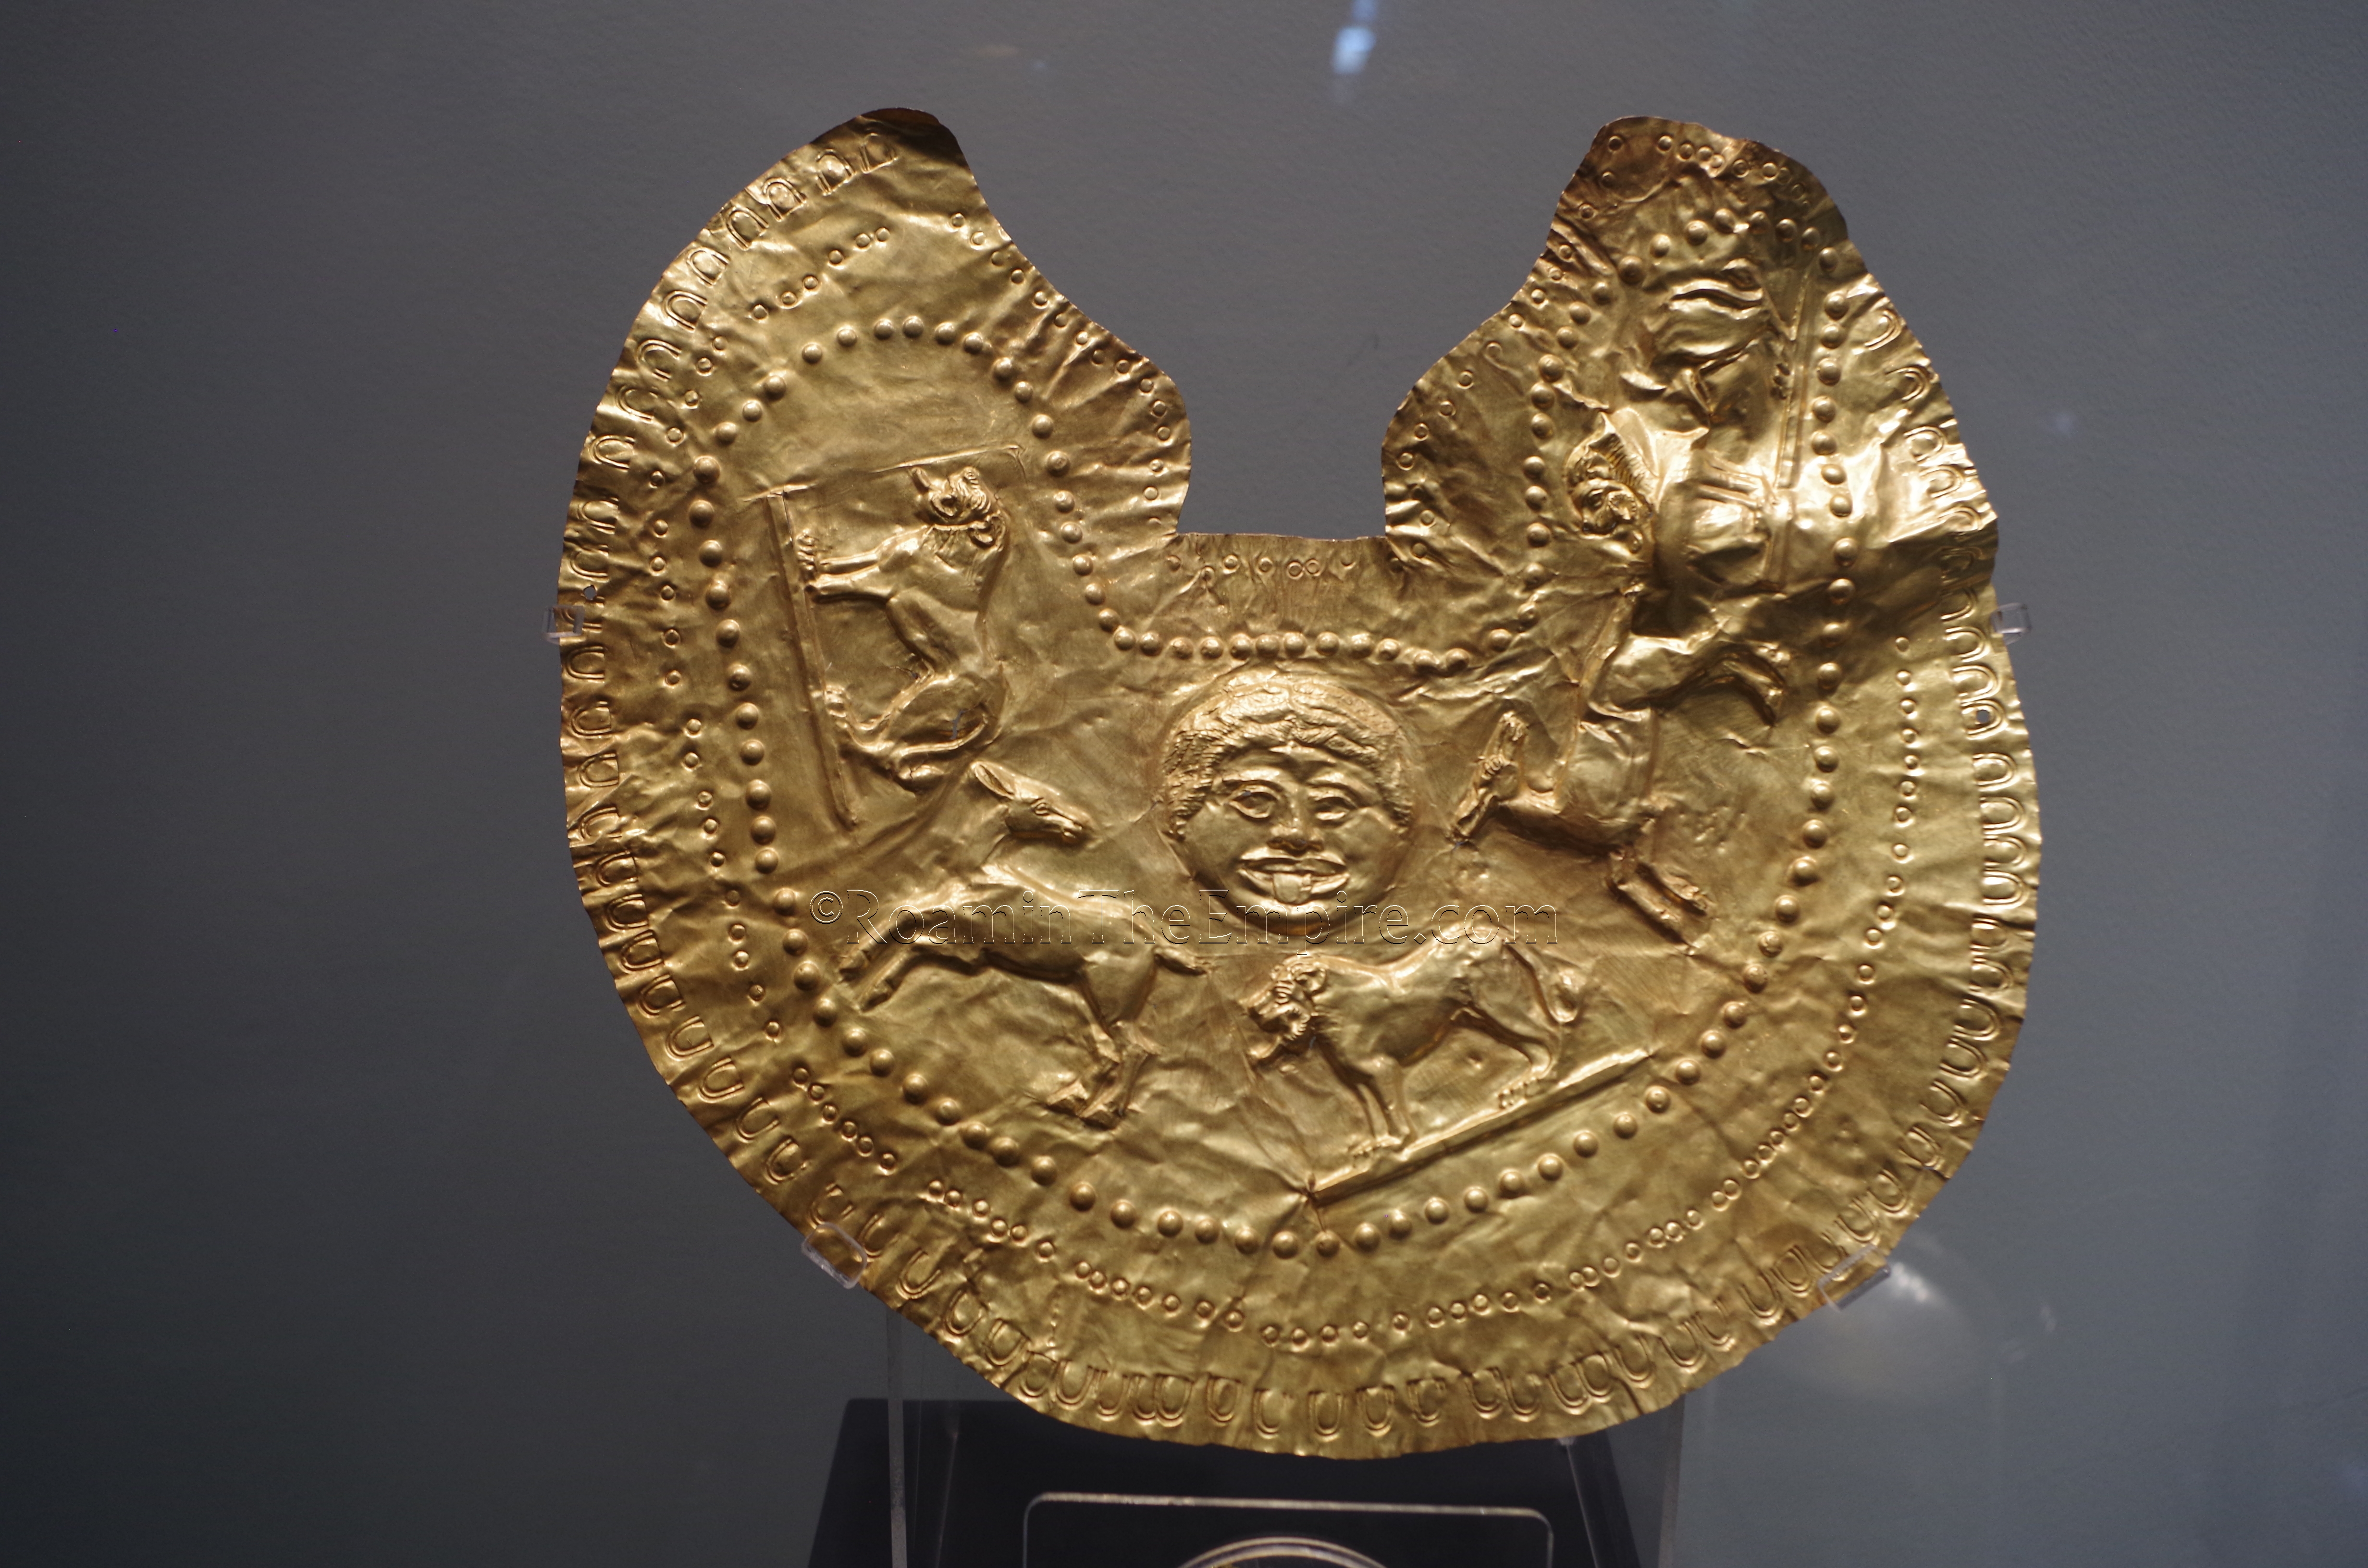 Gold pectoral piece depicting lions, deer, and Medusa from a 5th century BCE Thracian tomb at Chernozem. Regional Archaeological Museum.